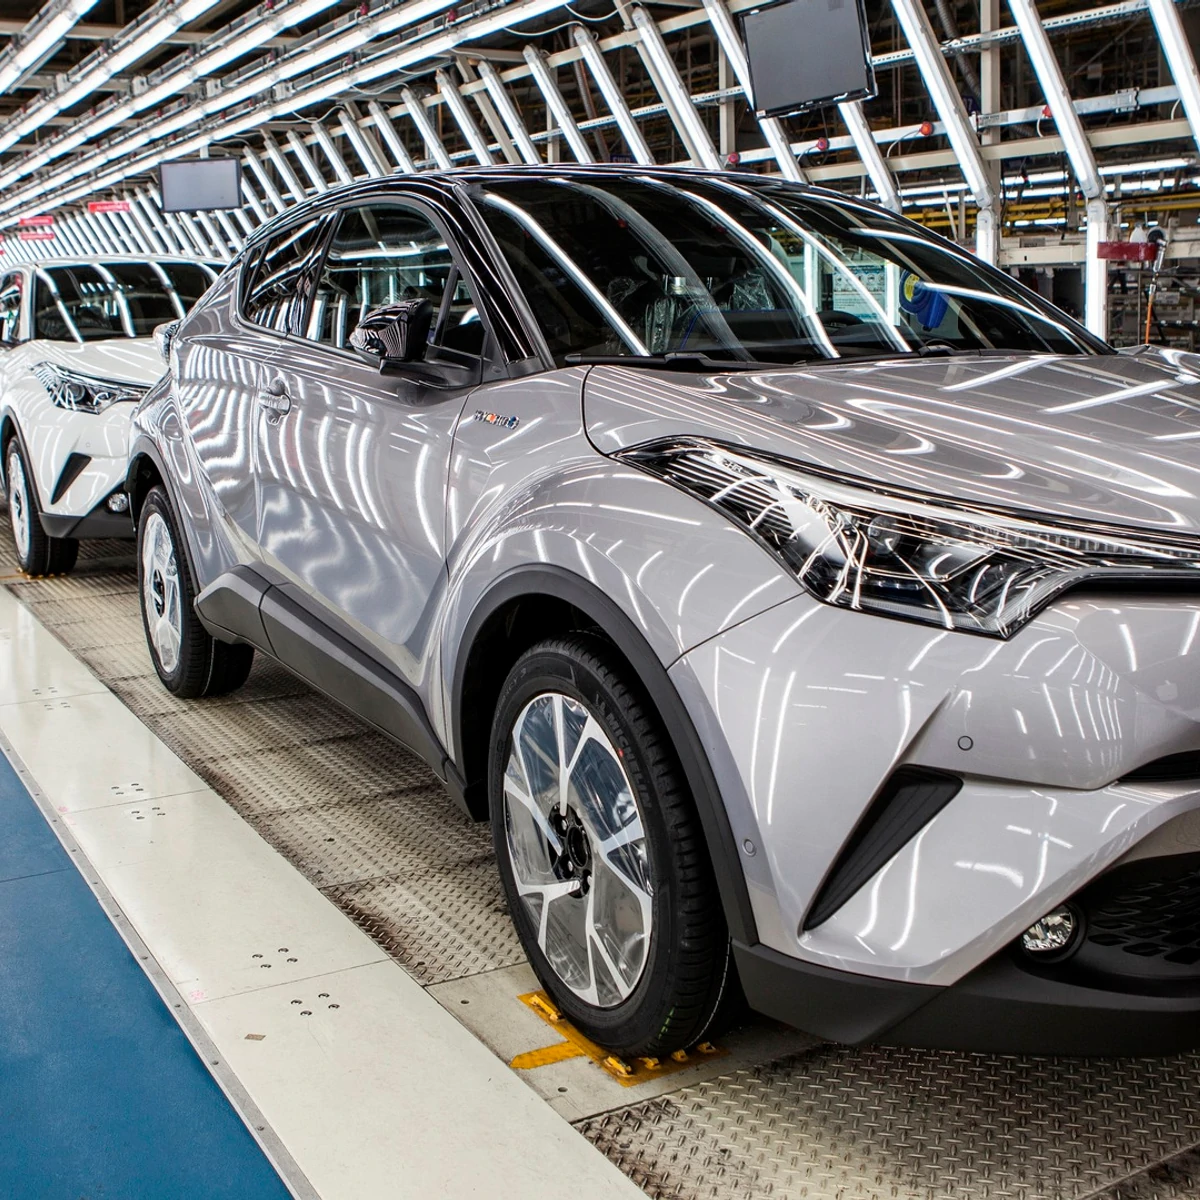 Toyota Corolla Hybrid Manufactured in Turkey, Corolla assembly line